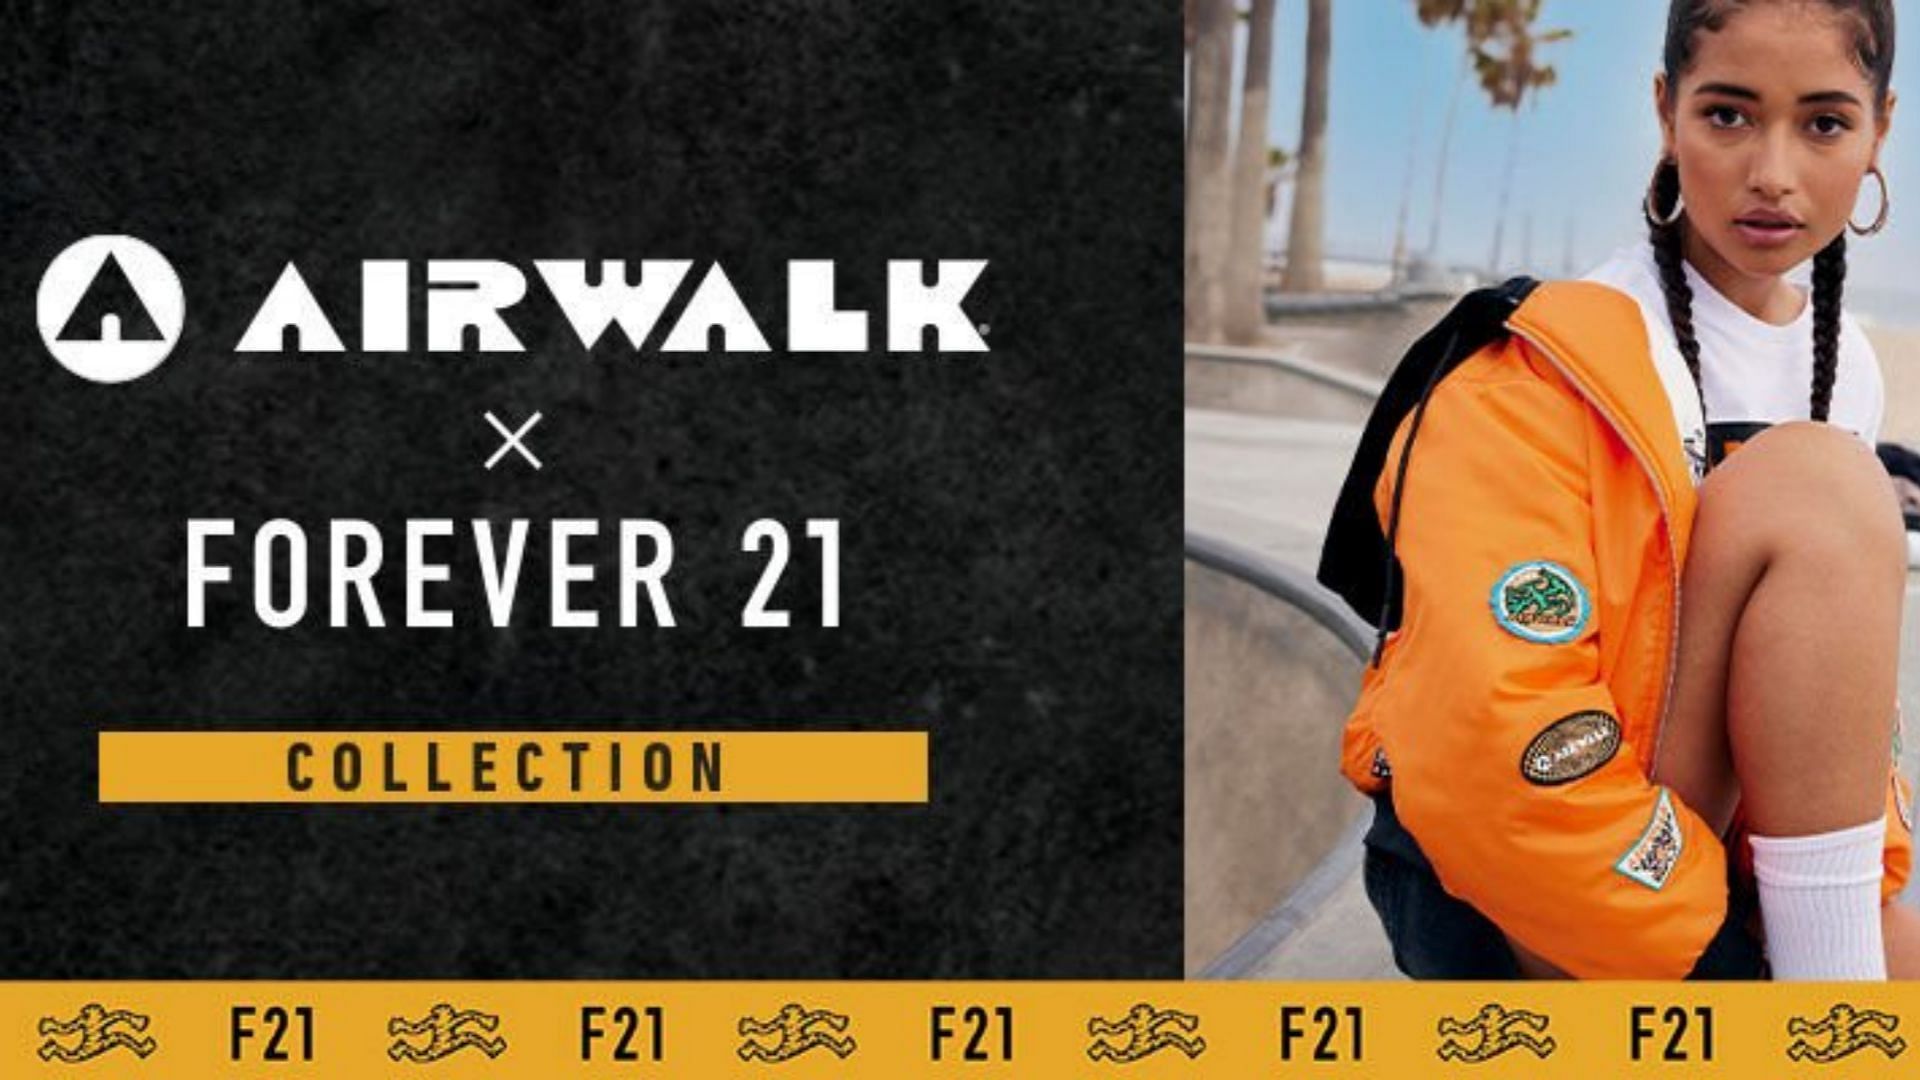 Forever 21 x Airwalk collection (Image via Forever 21)